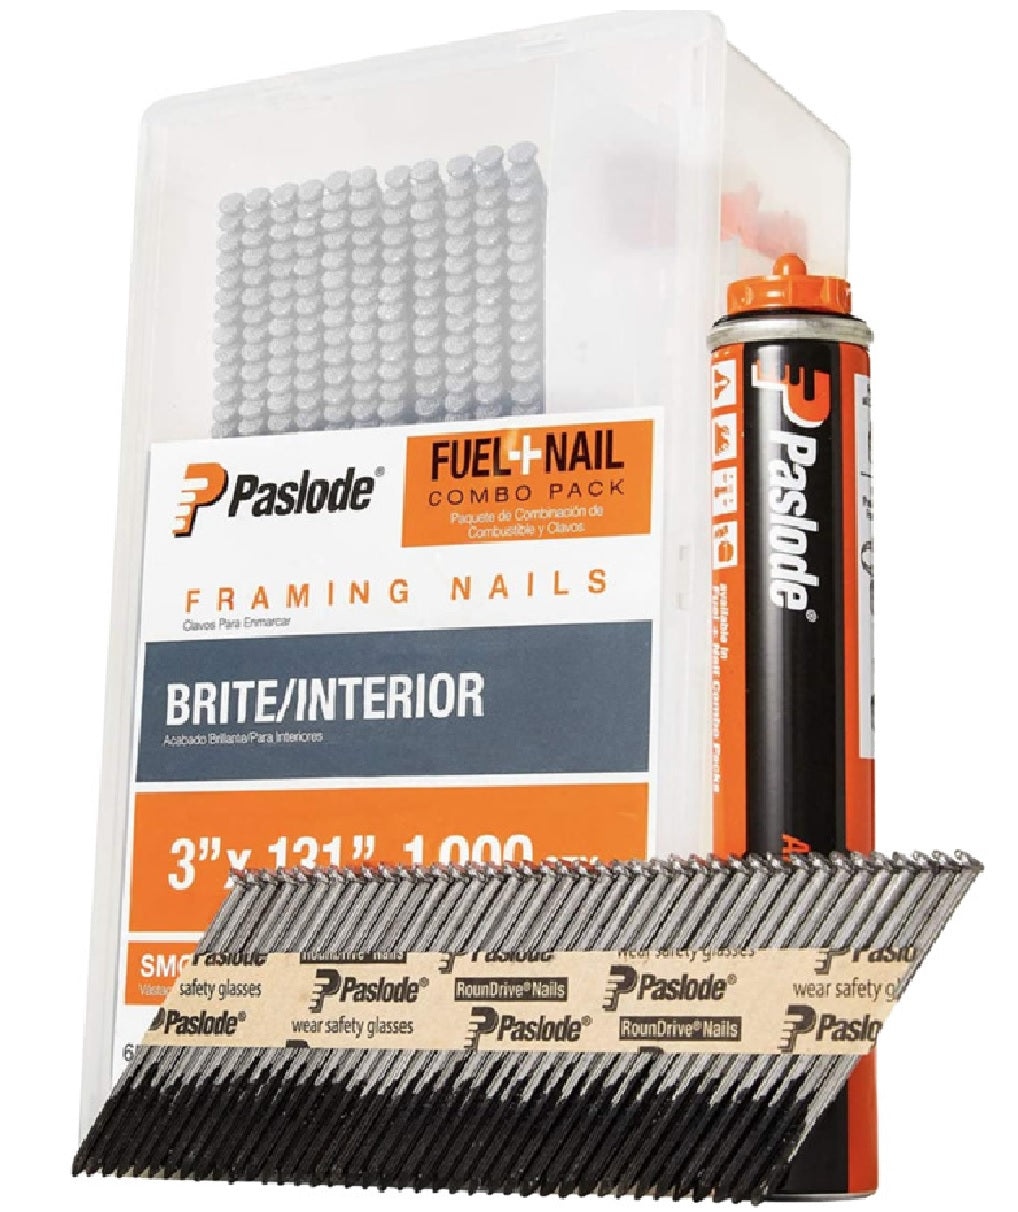 Paslode 650566 Angled Strip Fuel & Nail Kit, 3 Inch x .131 Inch